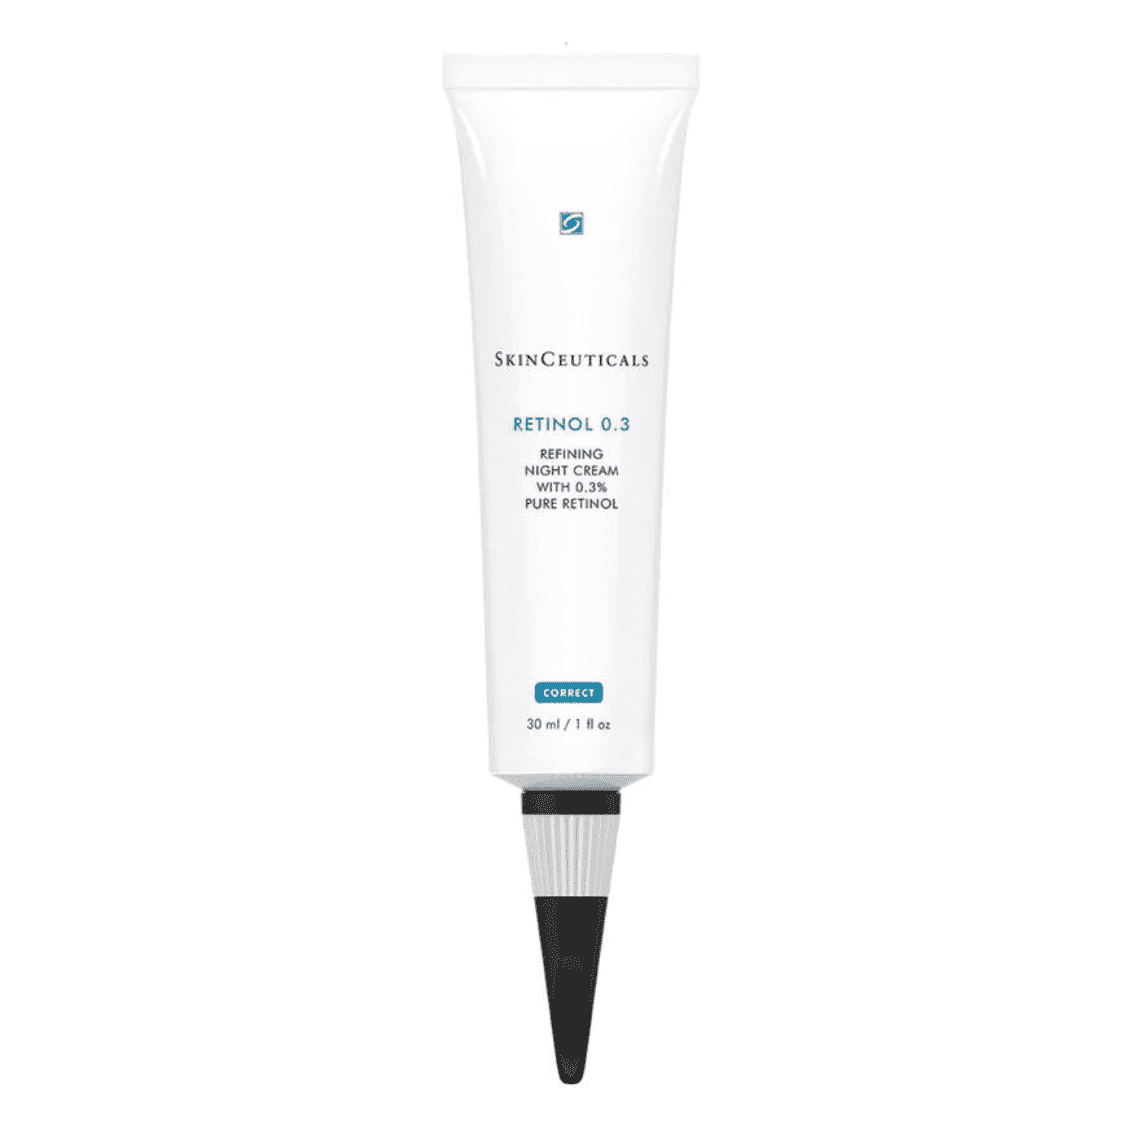 A tube of skinceuticals retinol 0.3 refining night cream with pure retinol, 30 ml size, primarily white packaging with blue and black text.